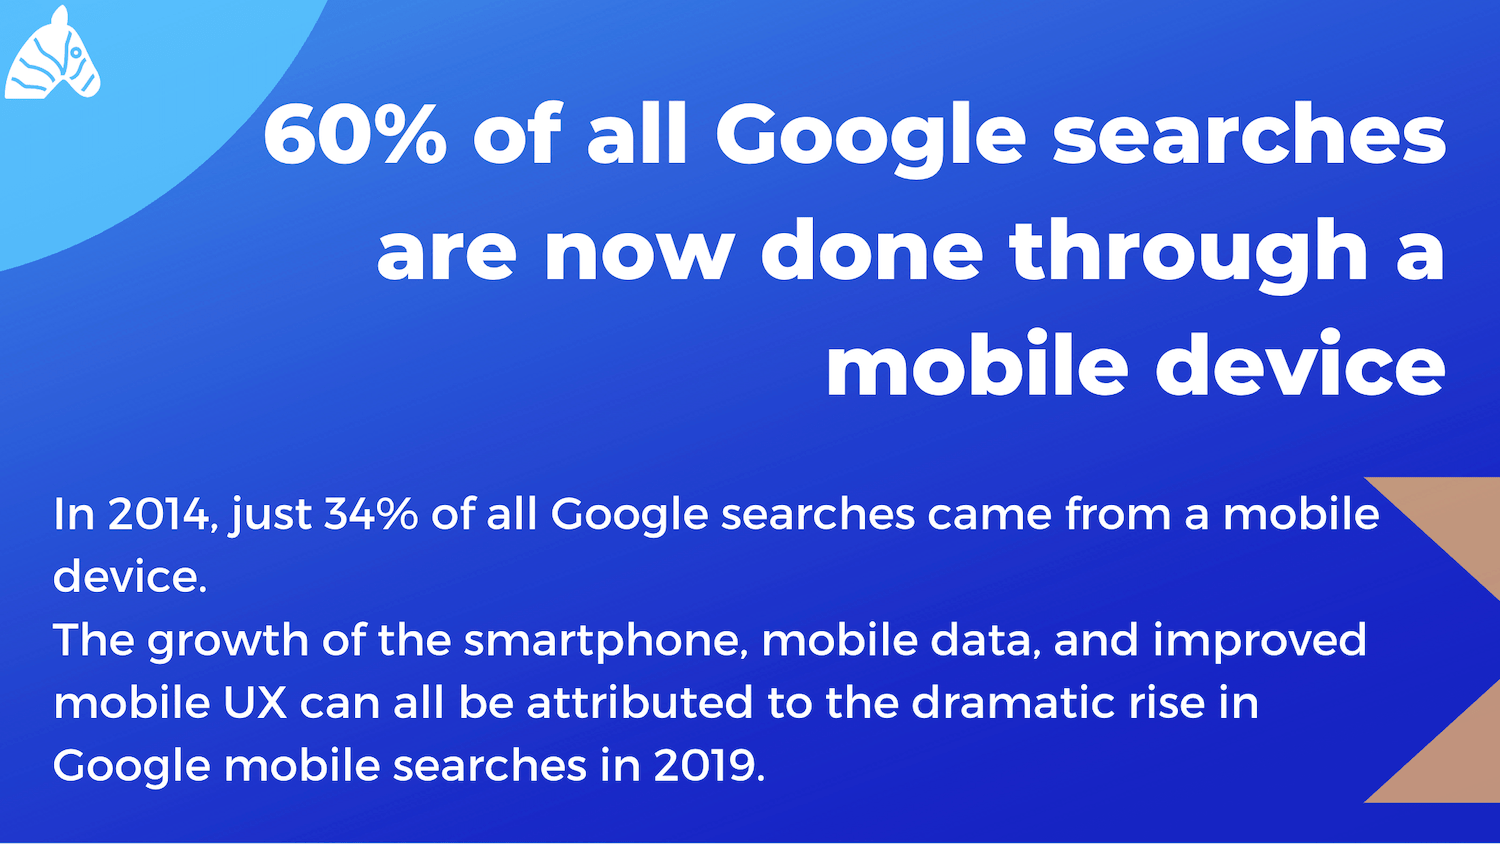 60% of all google searches are now done using mobile devices